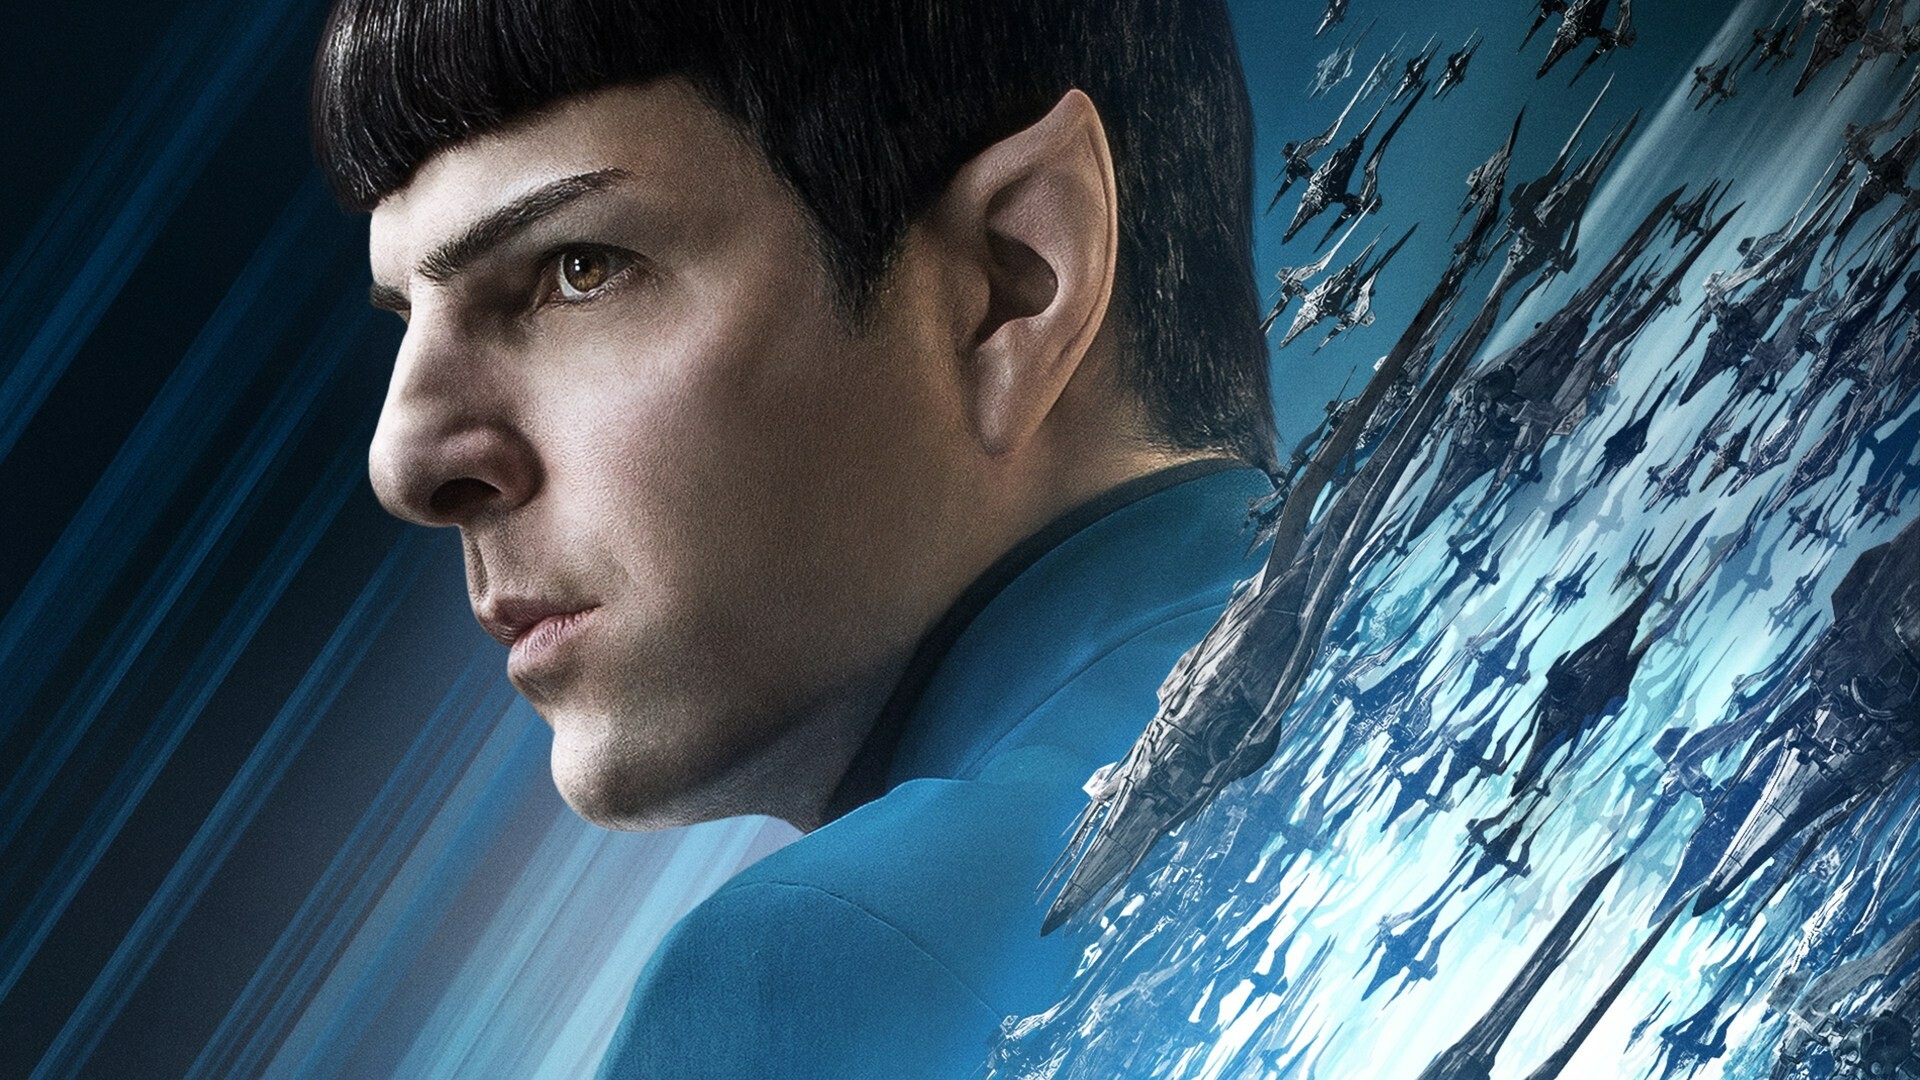 Star Trek: Zachary Quinto as Commander Spock, first officer, and science officer. 1920x1080 Full HD Background.